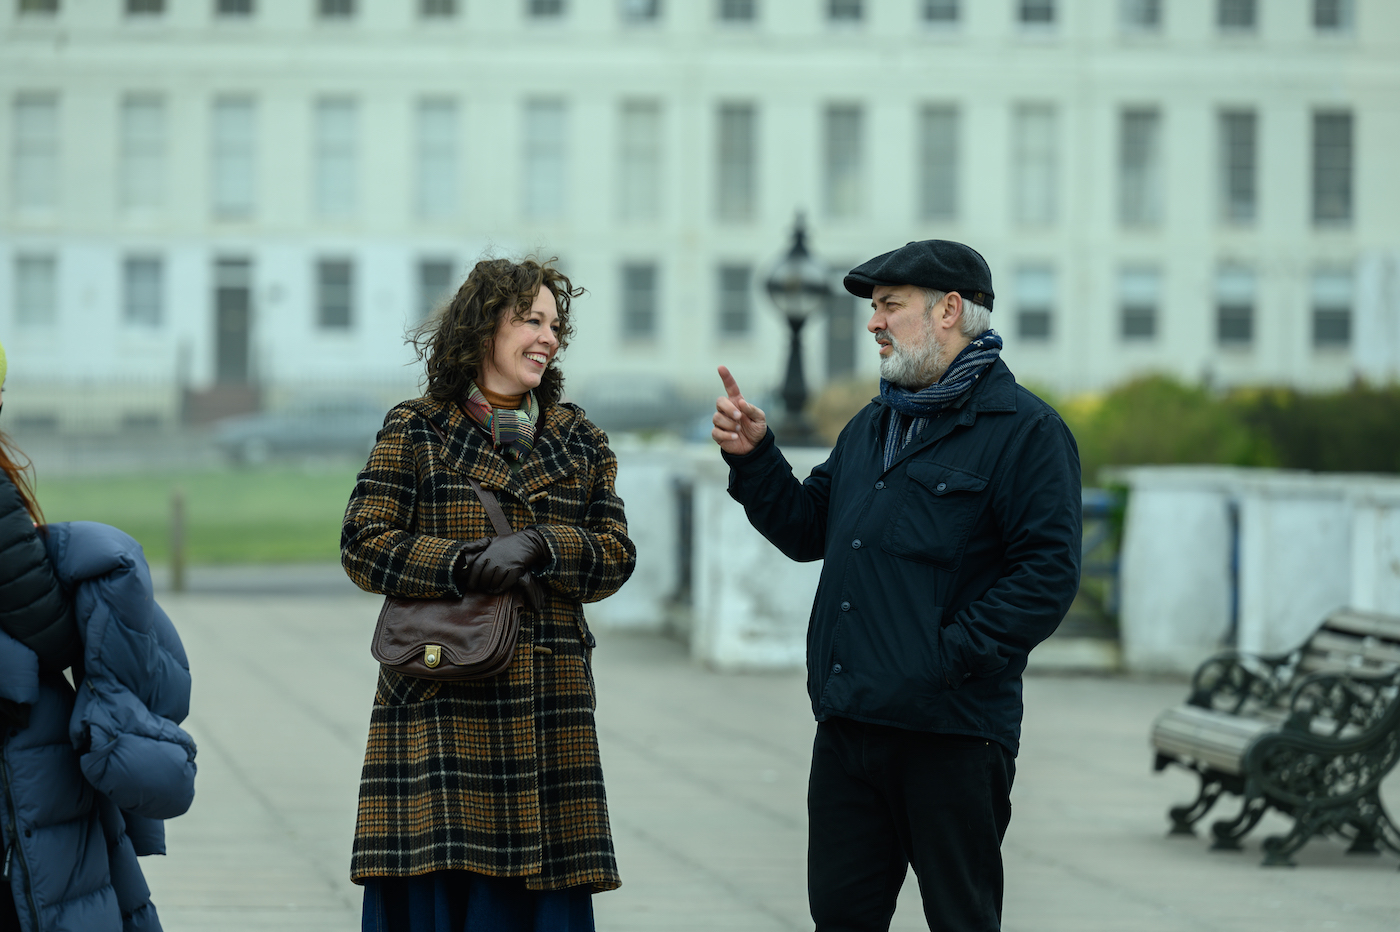 Olivia Colman and Sam Mendes on set of the film EMPIRE OF LIGHT. Photo by Parisa Taghizadeh, Courtesy of Searchlight Pictures. © 2022 20th Century Studios All Rights Reserved.